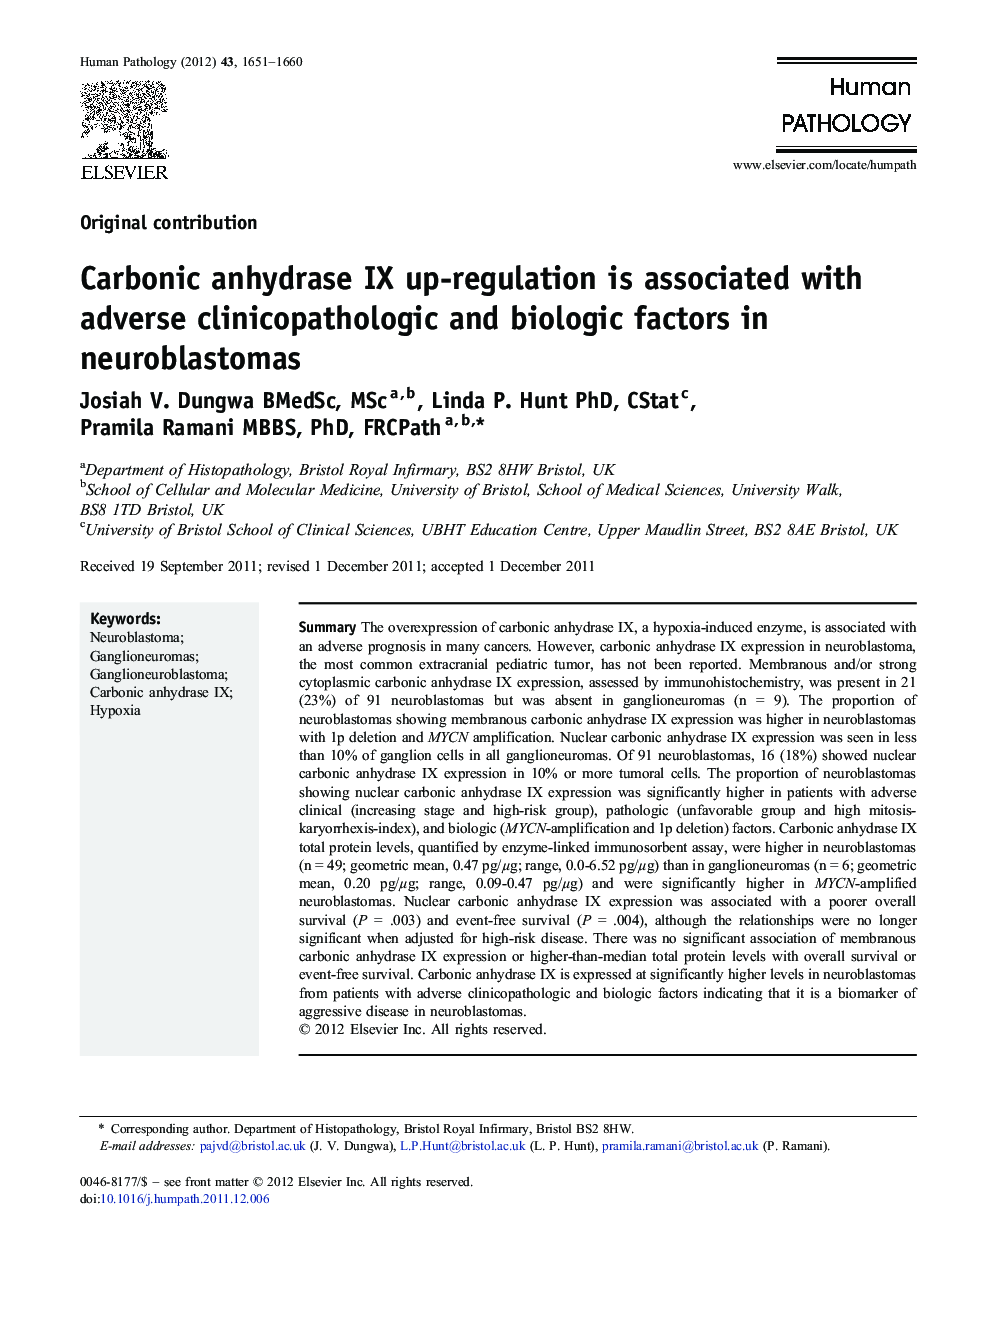 Carbonic anhydrase IX up-regulation is associated with adverse clinicopathologic and biologic factors in neuroblastomas